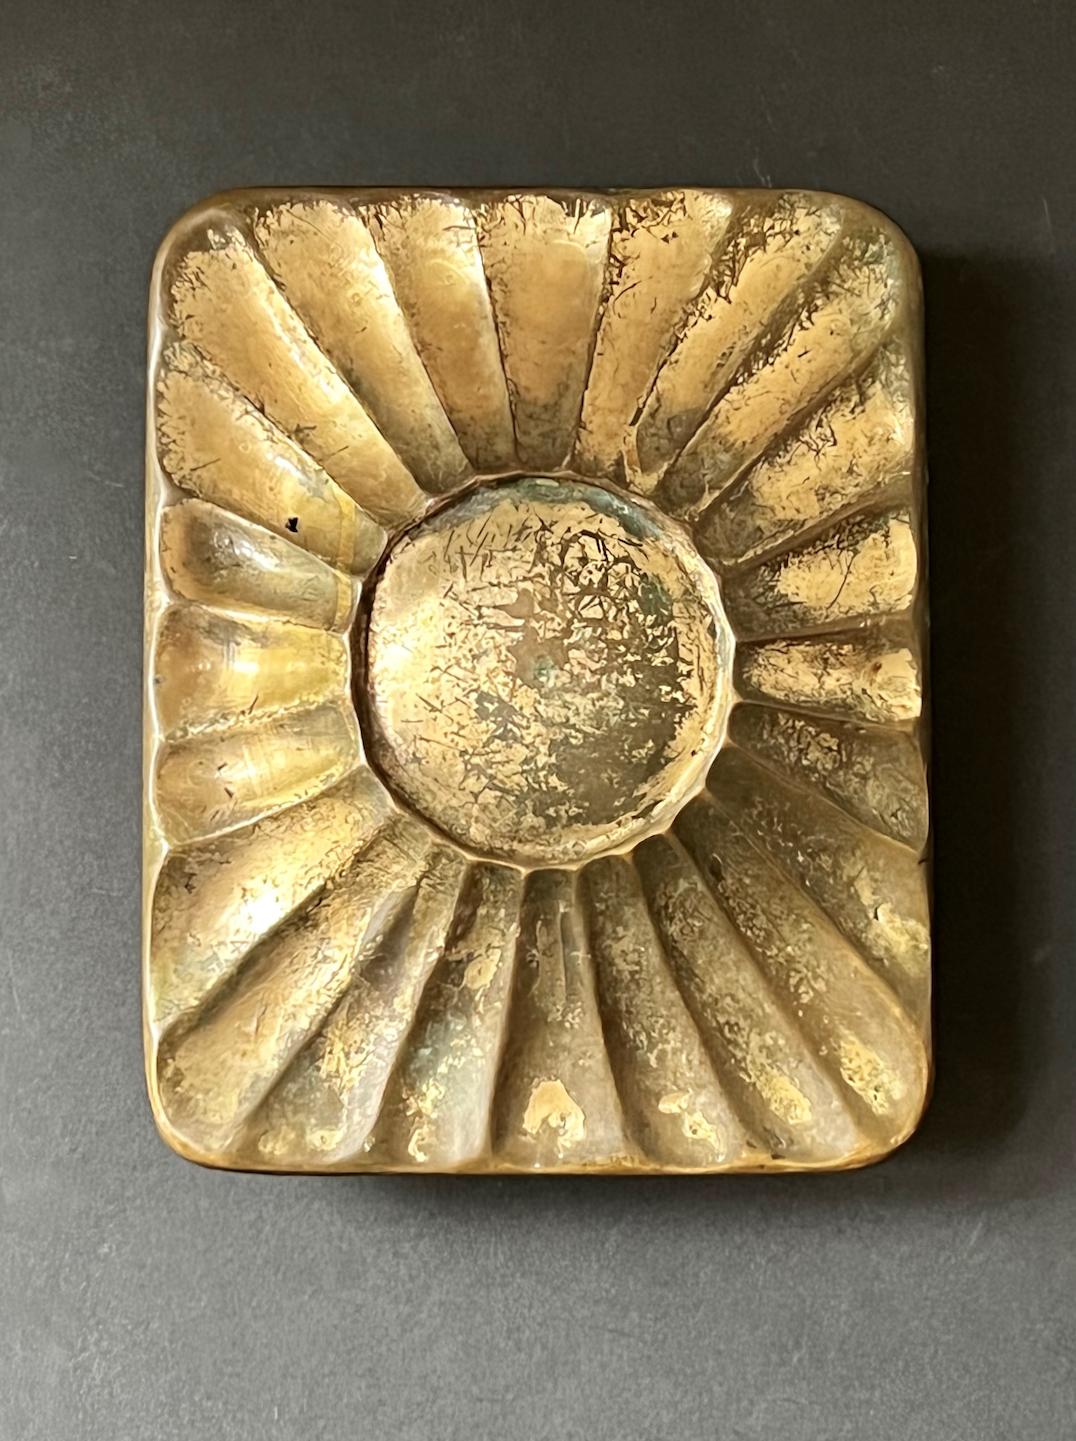 A heavy bronze push or pull door handle with raised sunburst design, mid-late 20th century, European.

A hand-made piece with lots of patina. The metal has a golden finish, with signs of wear revealing darker tones below (also see picture of the